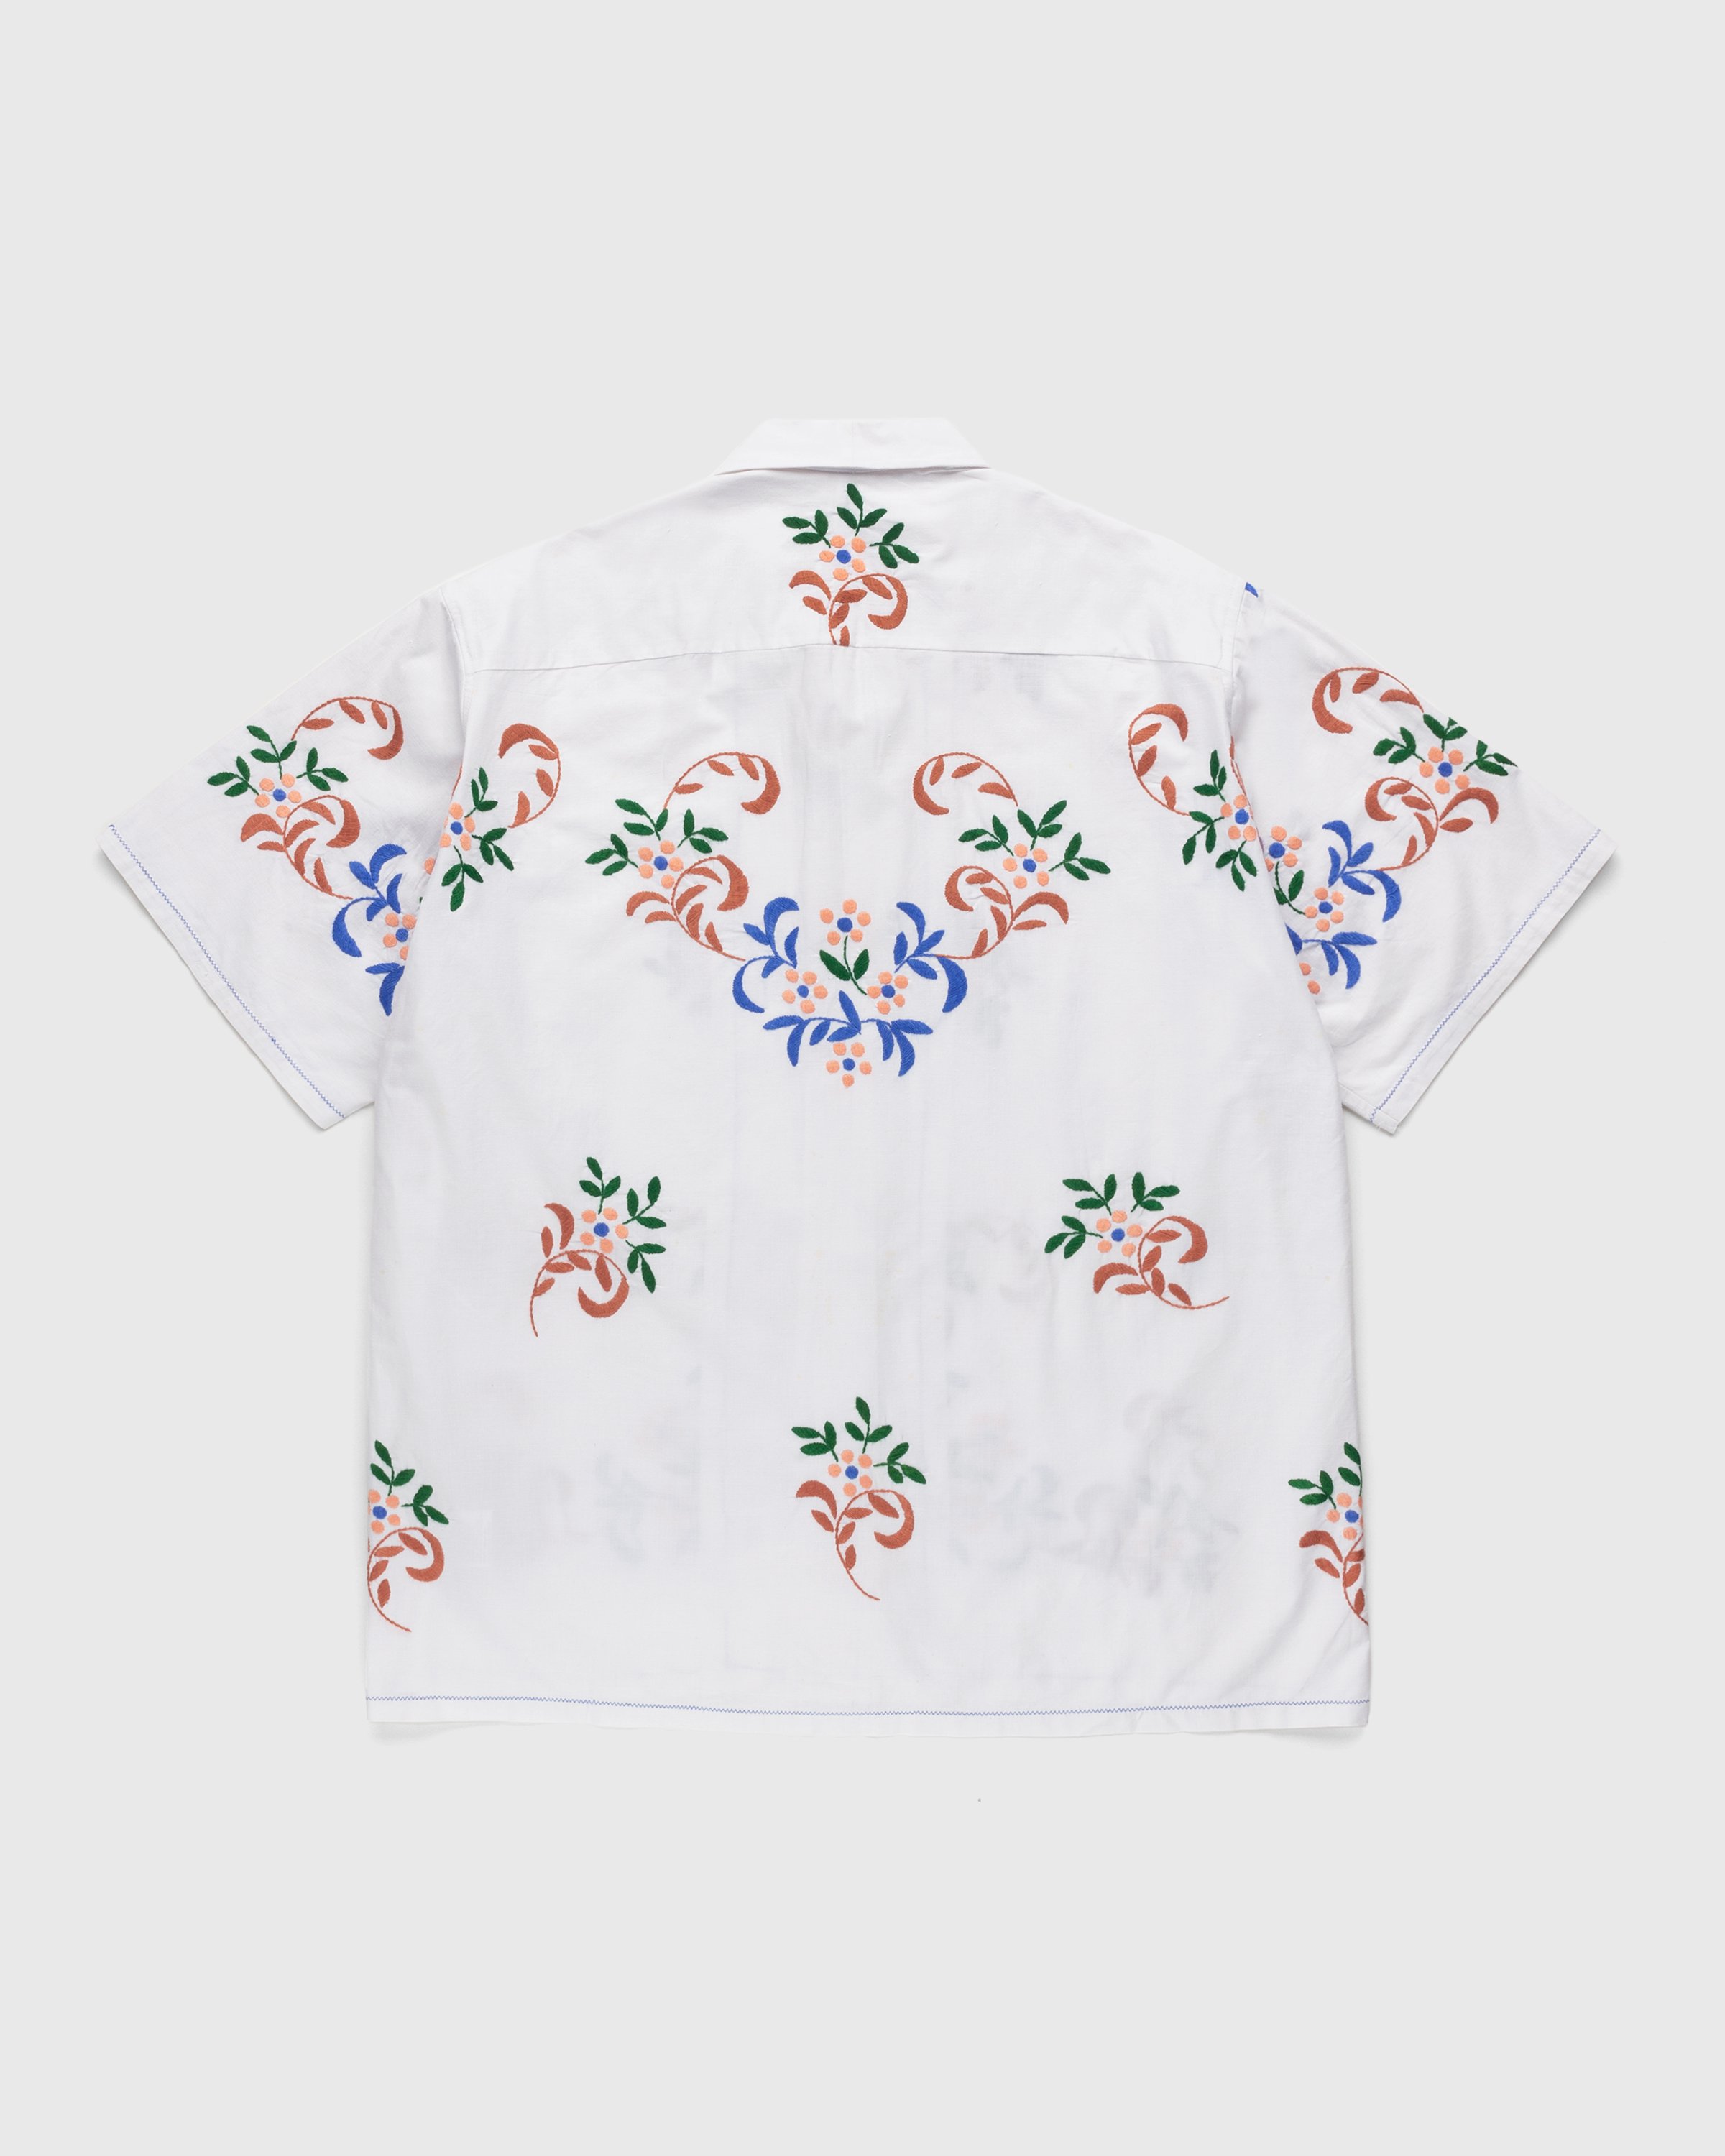 Diomene by Damir Doma - Embroidered Vacation Shirt White/Blue - Clothing - White - Image 2